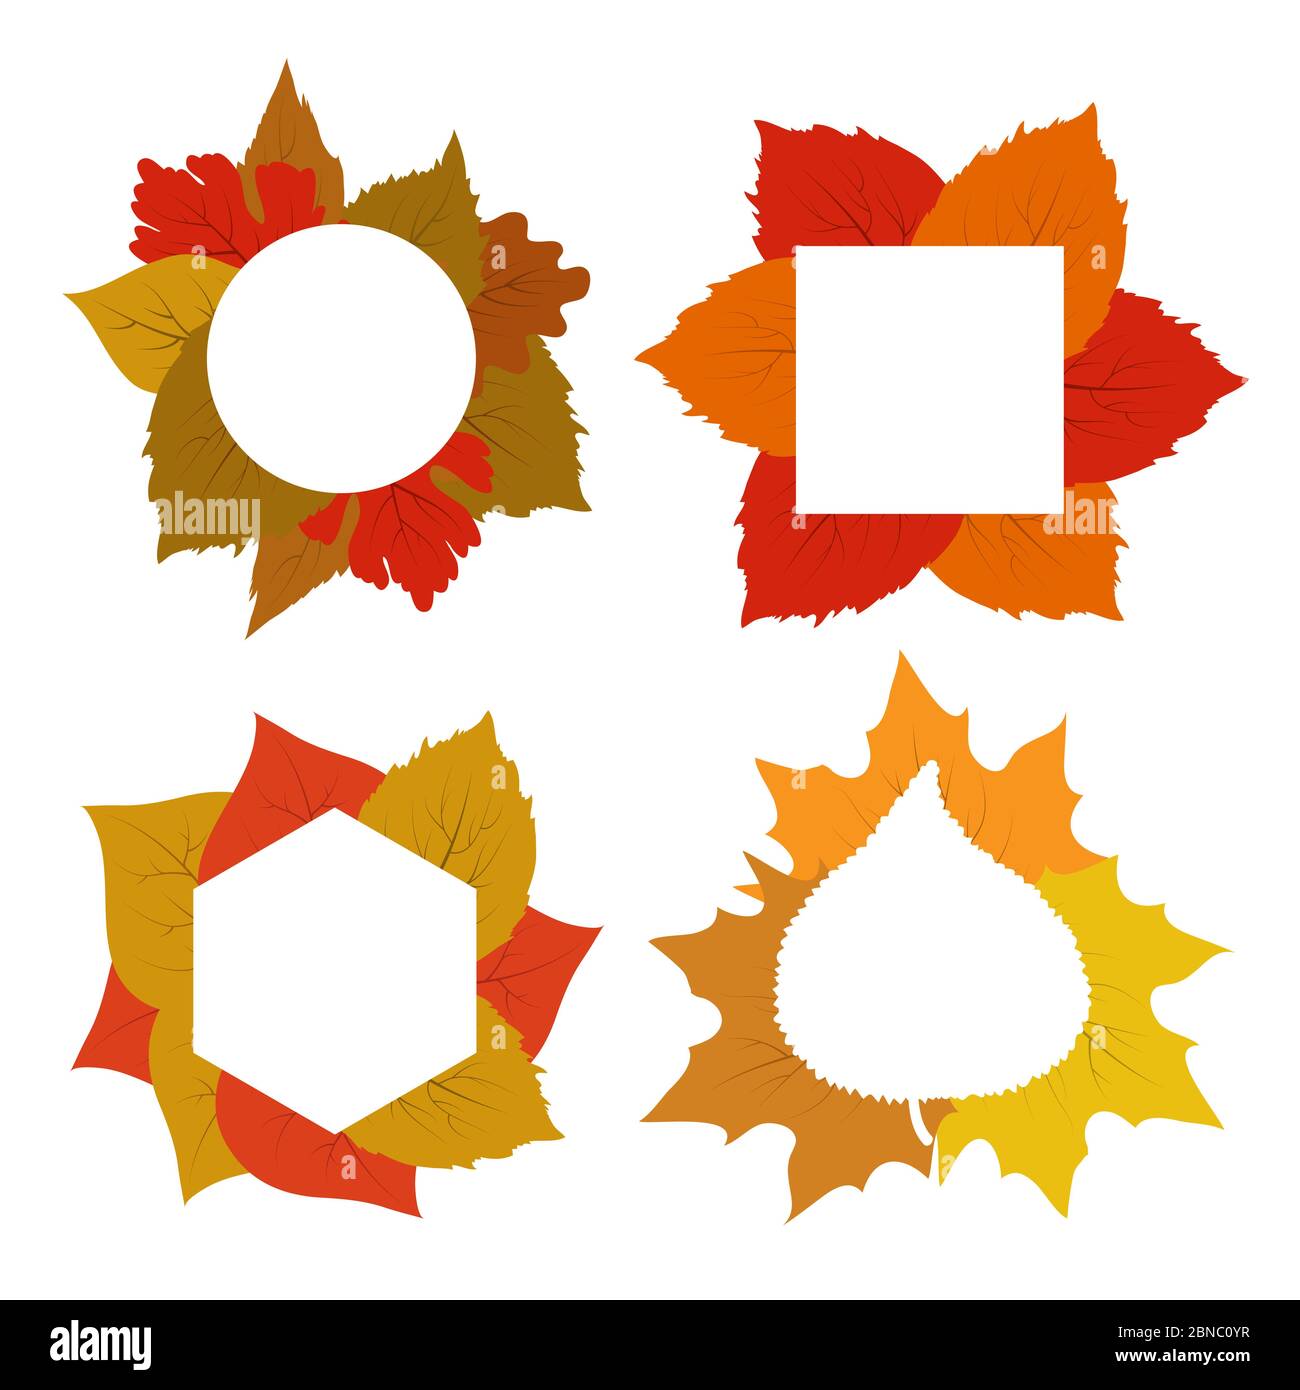 Yellow, red, orange autumn leaves vector banner templates isolated on white illustration Stock Vector